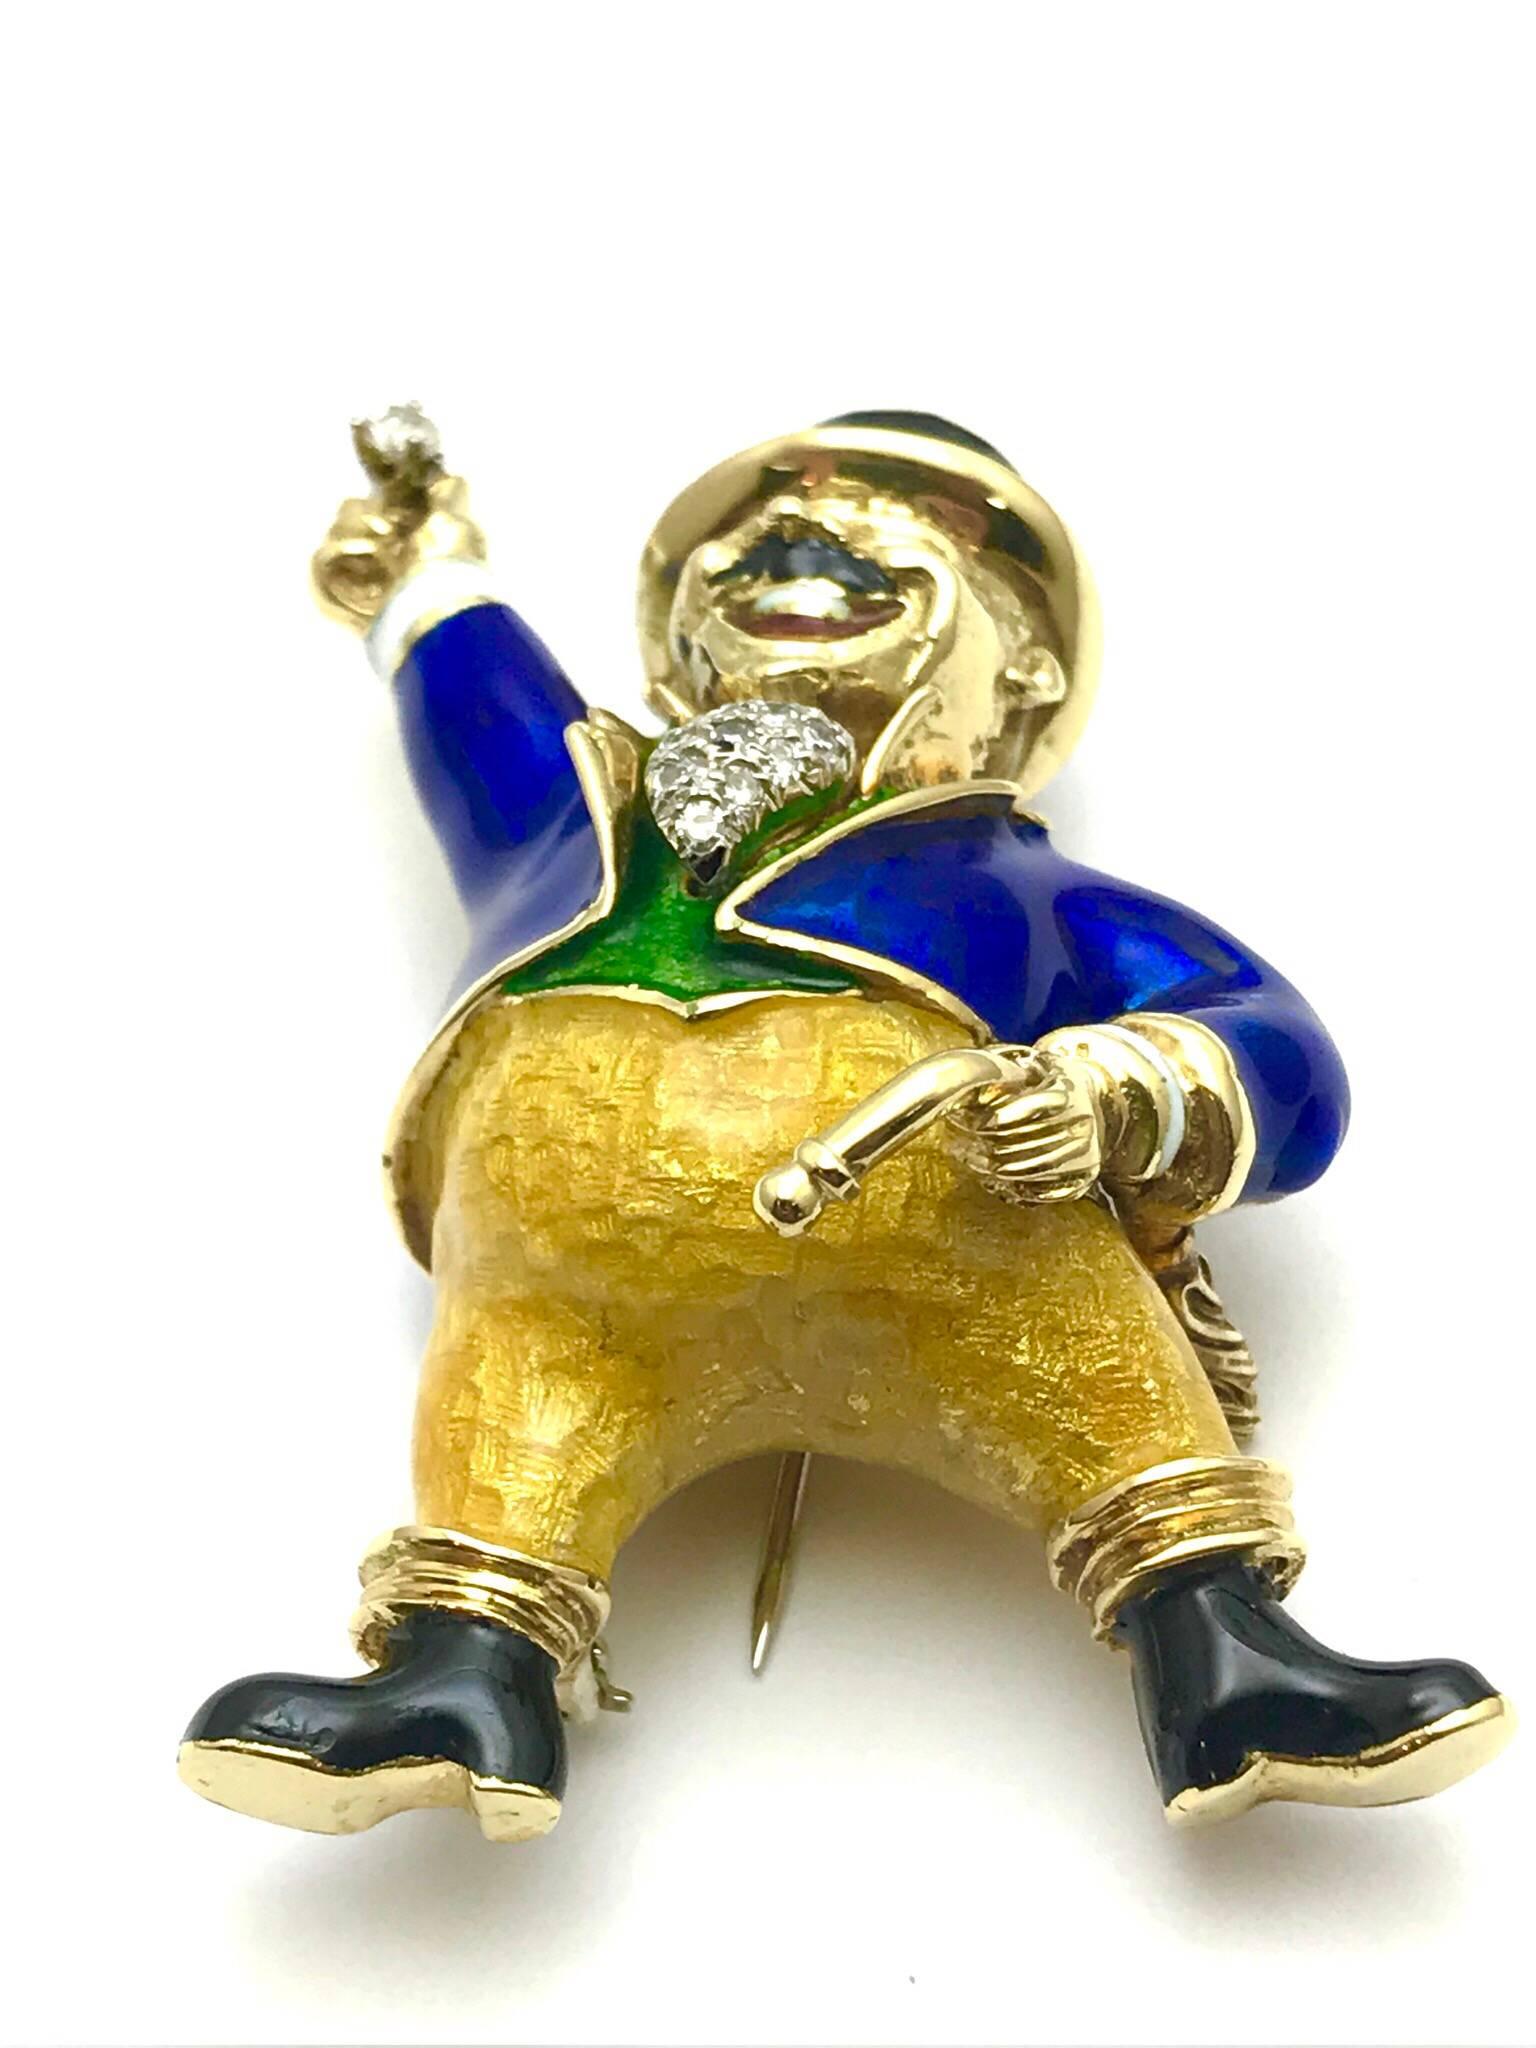 The Greatest Showman Ringmaster brooch, made from 18 karat yellow gold, with diamond, and multi color enamel.  The ringmaster is in traditional attire of a black top hat, a bright gold trimmed blue tailcoat, tufted white scarf, made up of round